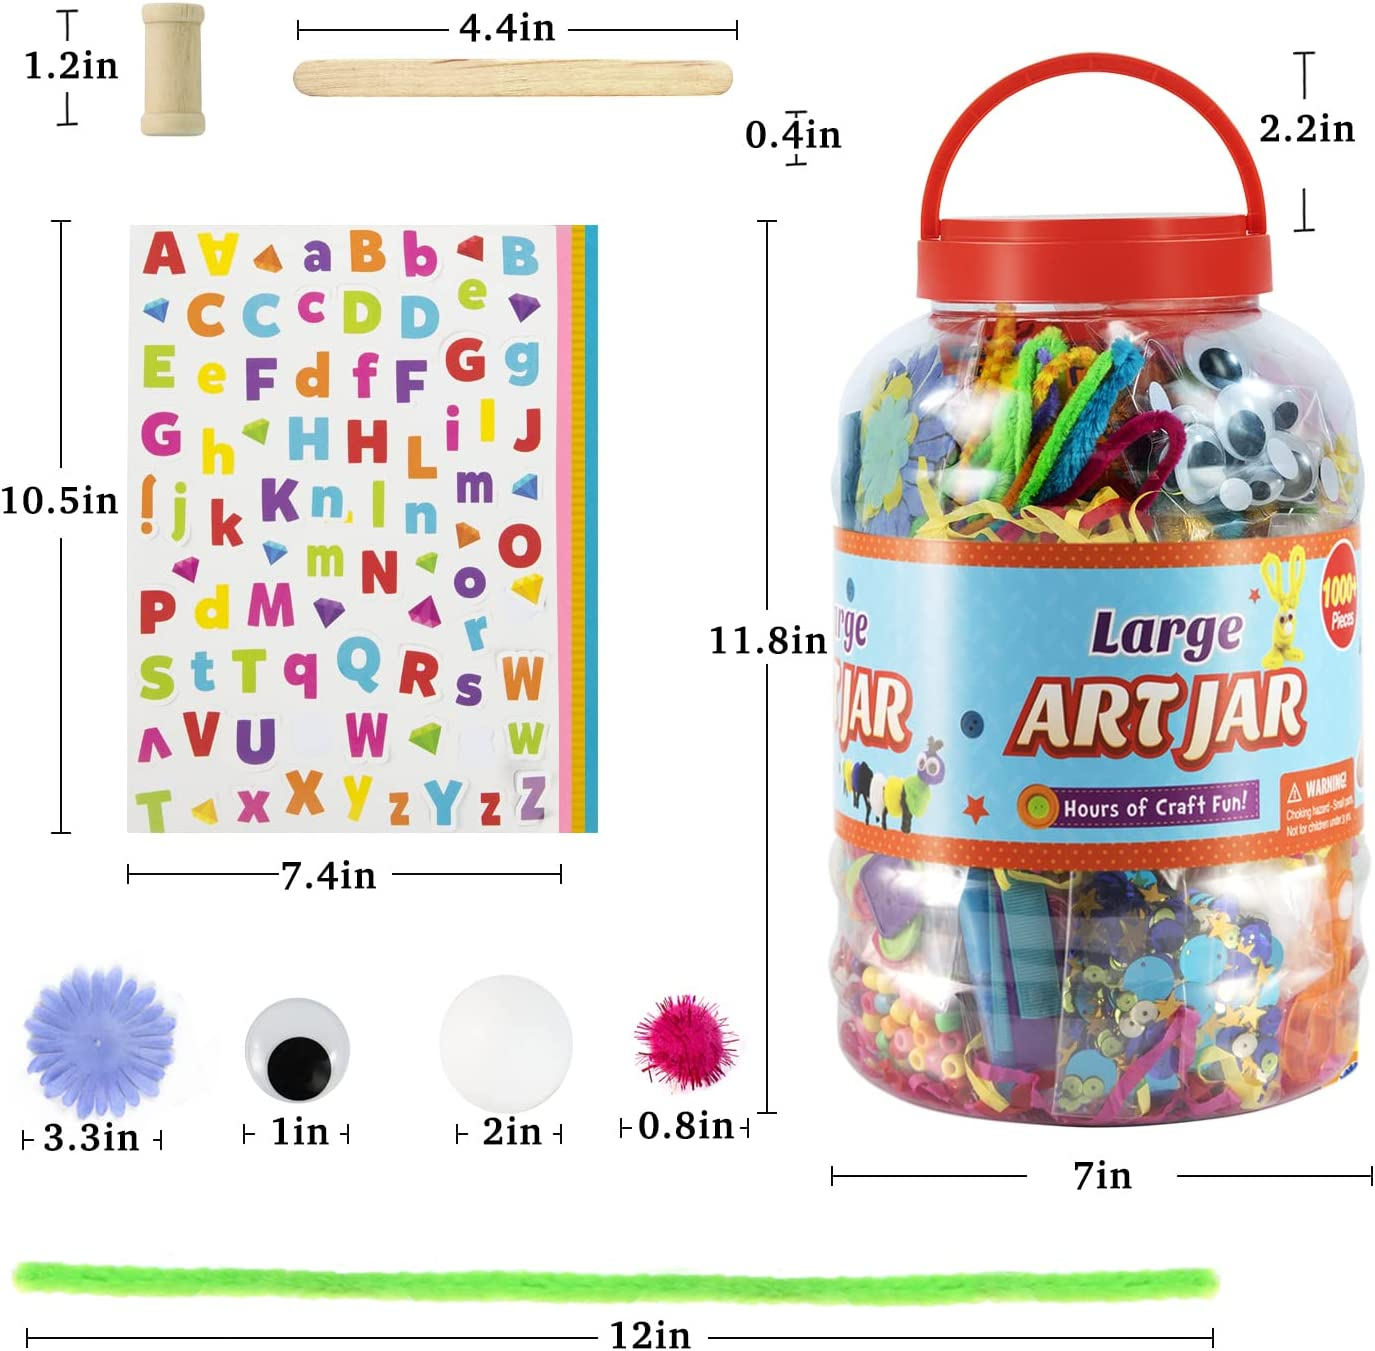 Arts and Crafts Supplies for Kids - 1000 More Piece Set - All in One Craft Jars Projects for Kids Ages 6 7 8 9 10 11 12 Homeschool Crafts Supplies